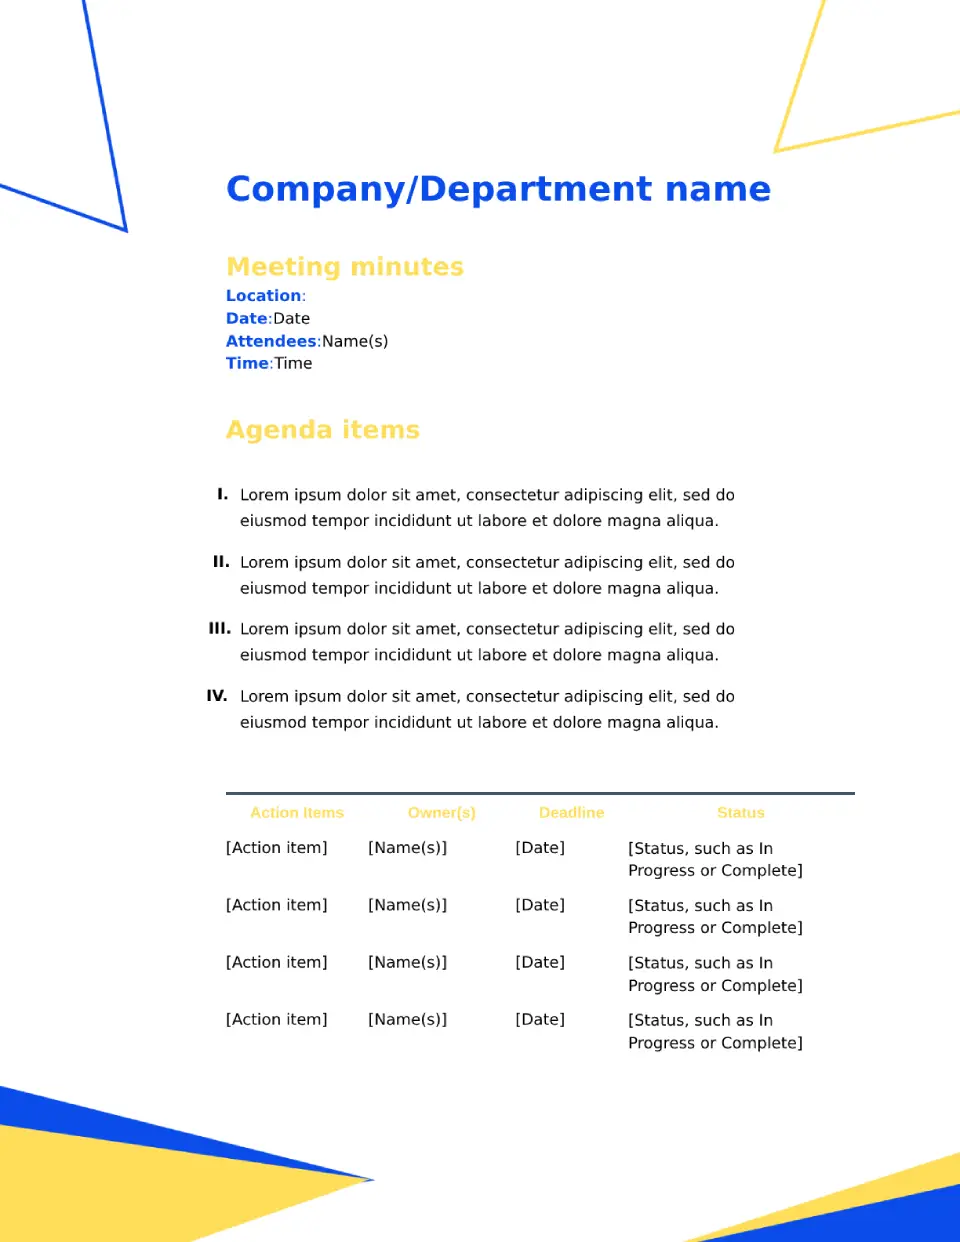 Corporate Meeting Minutes Template for Google Docs